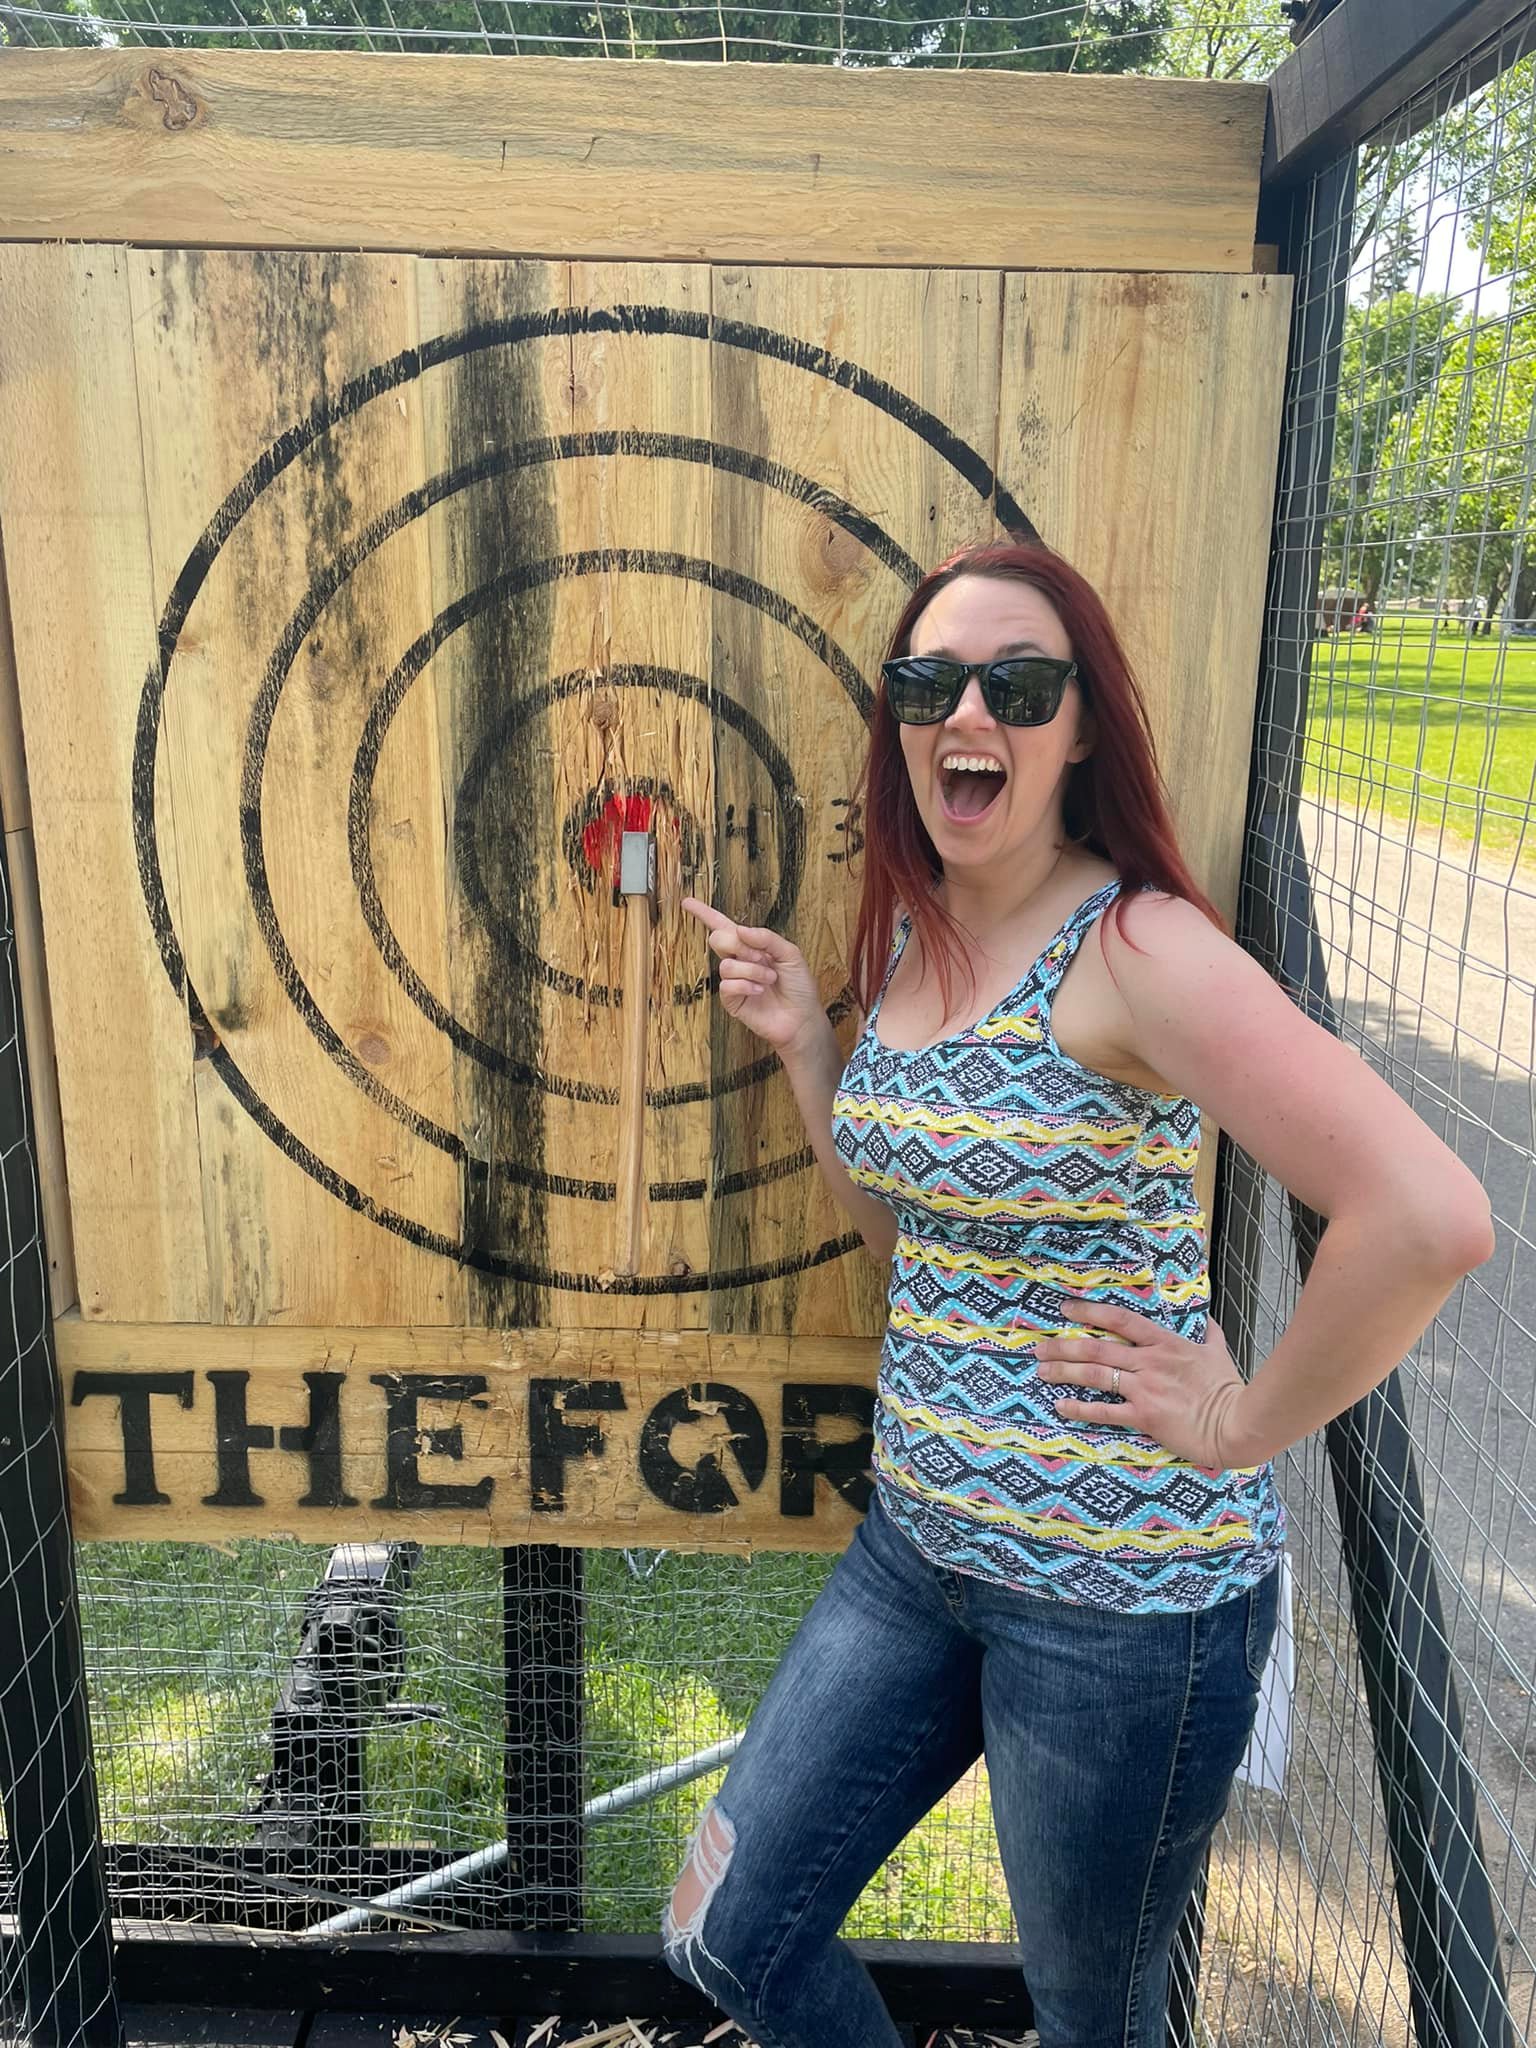 The Forge Axe Throwing